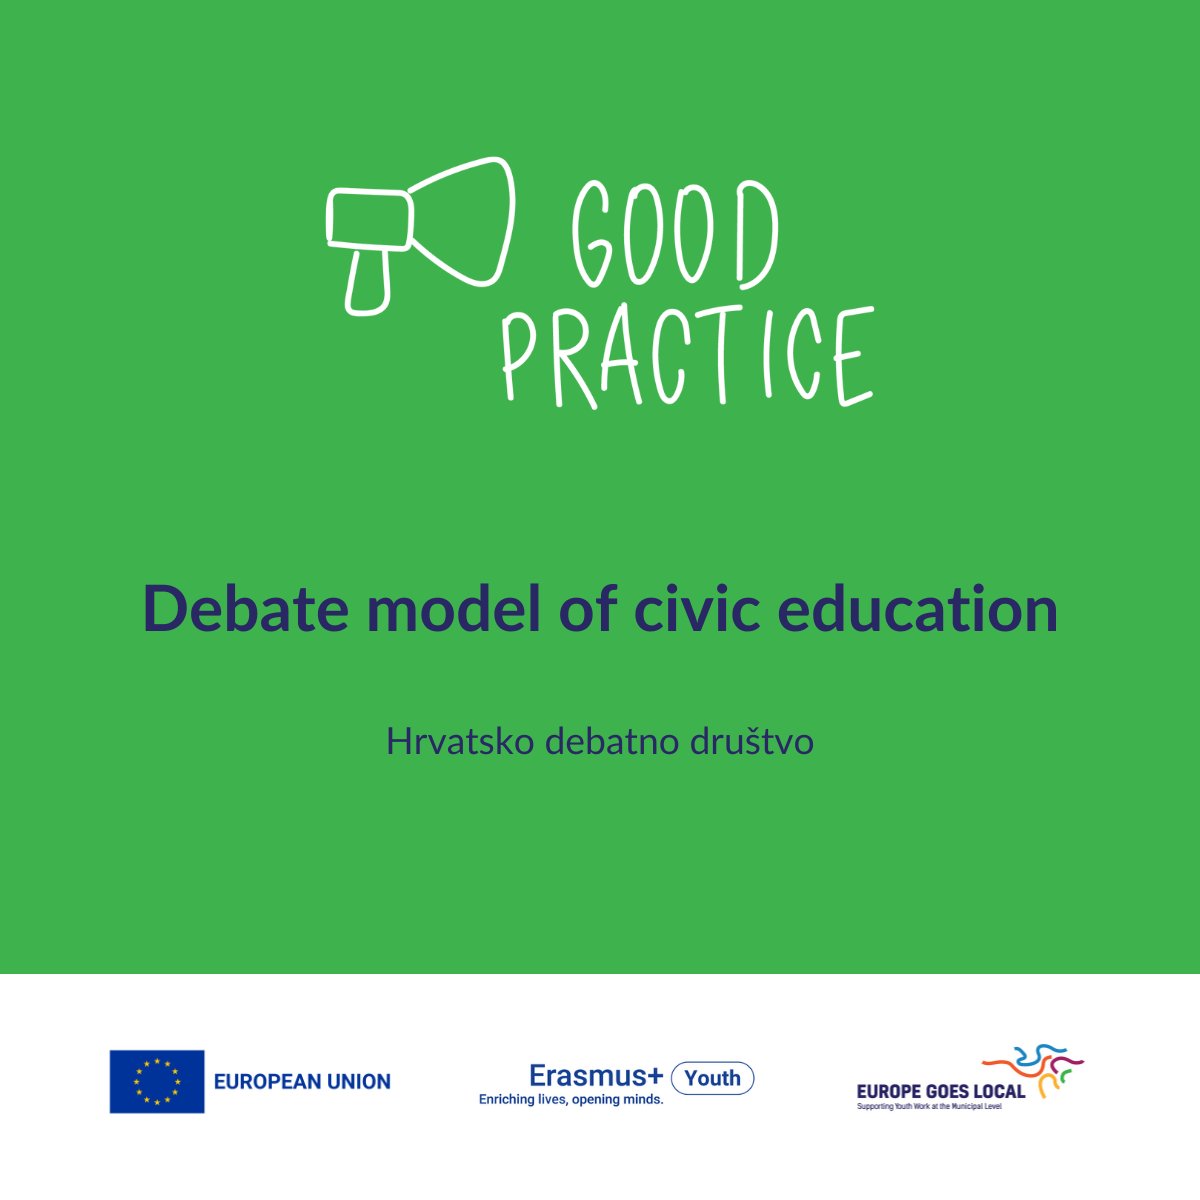 Another week, another fantastic #goodpractice from the many in our database! This week we would like to present to you the Debate model of civic education by Hrvatsko debatno društvo! Read all about it on our website: europegoeslocal.eu/good-practice-… #Participation #decisionmaking